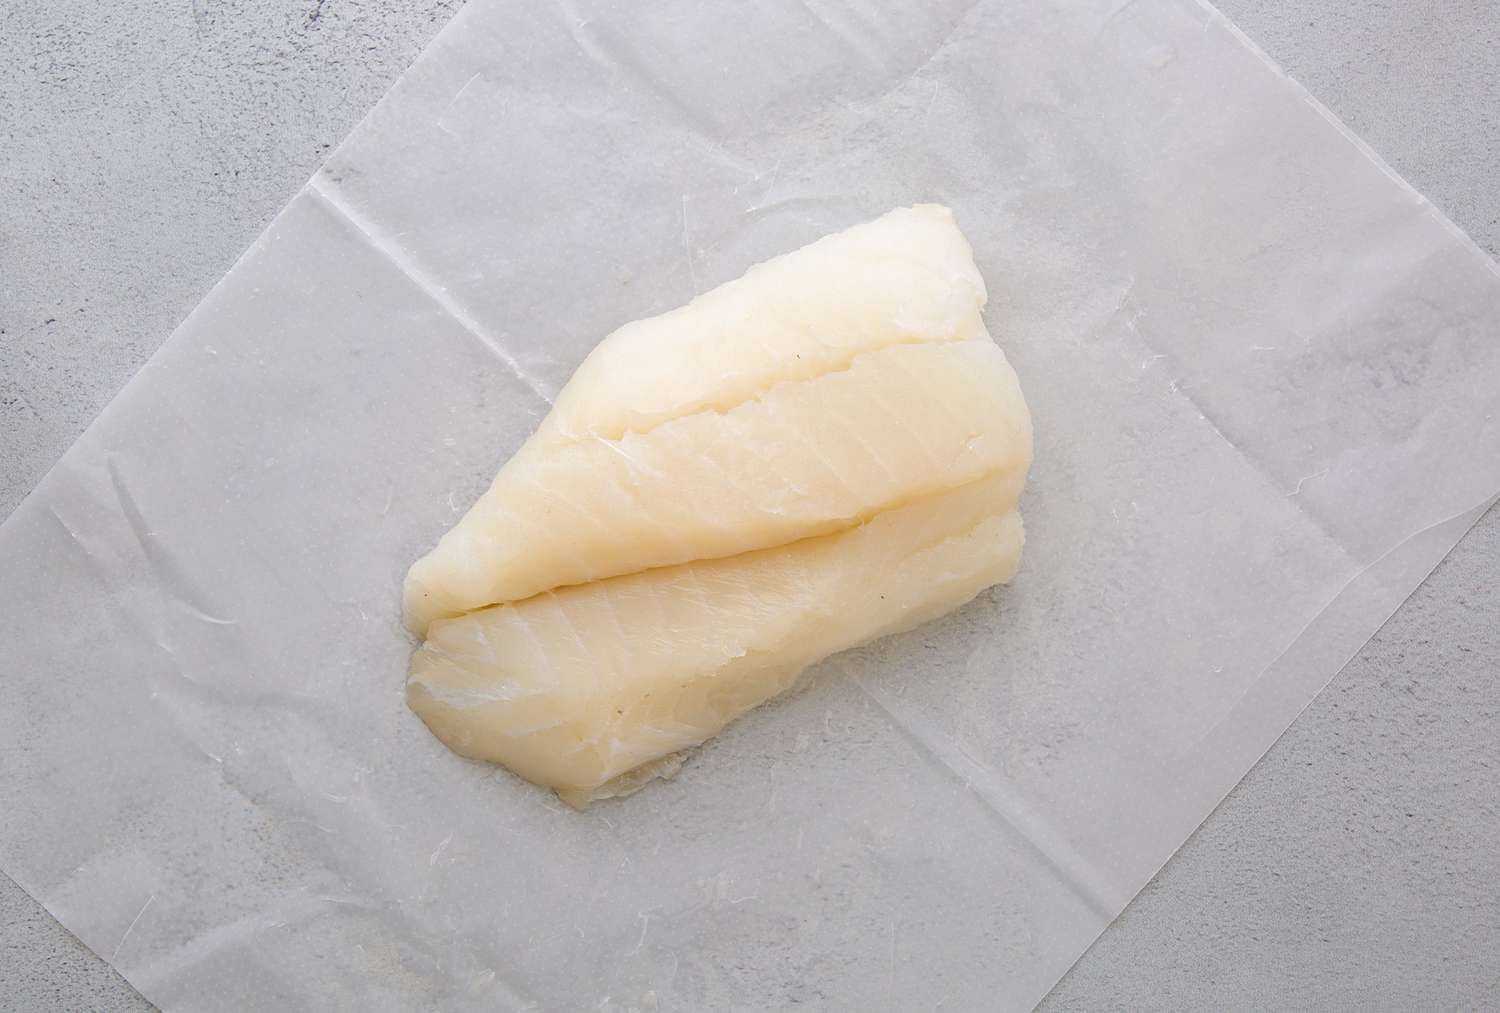 Different Types of Cod: Exploring Varieties of White Fish